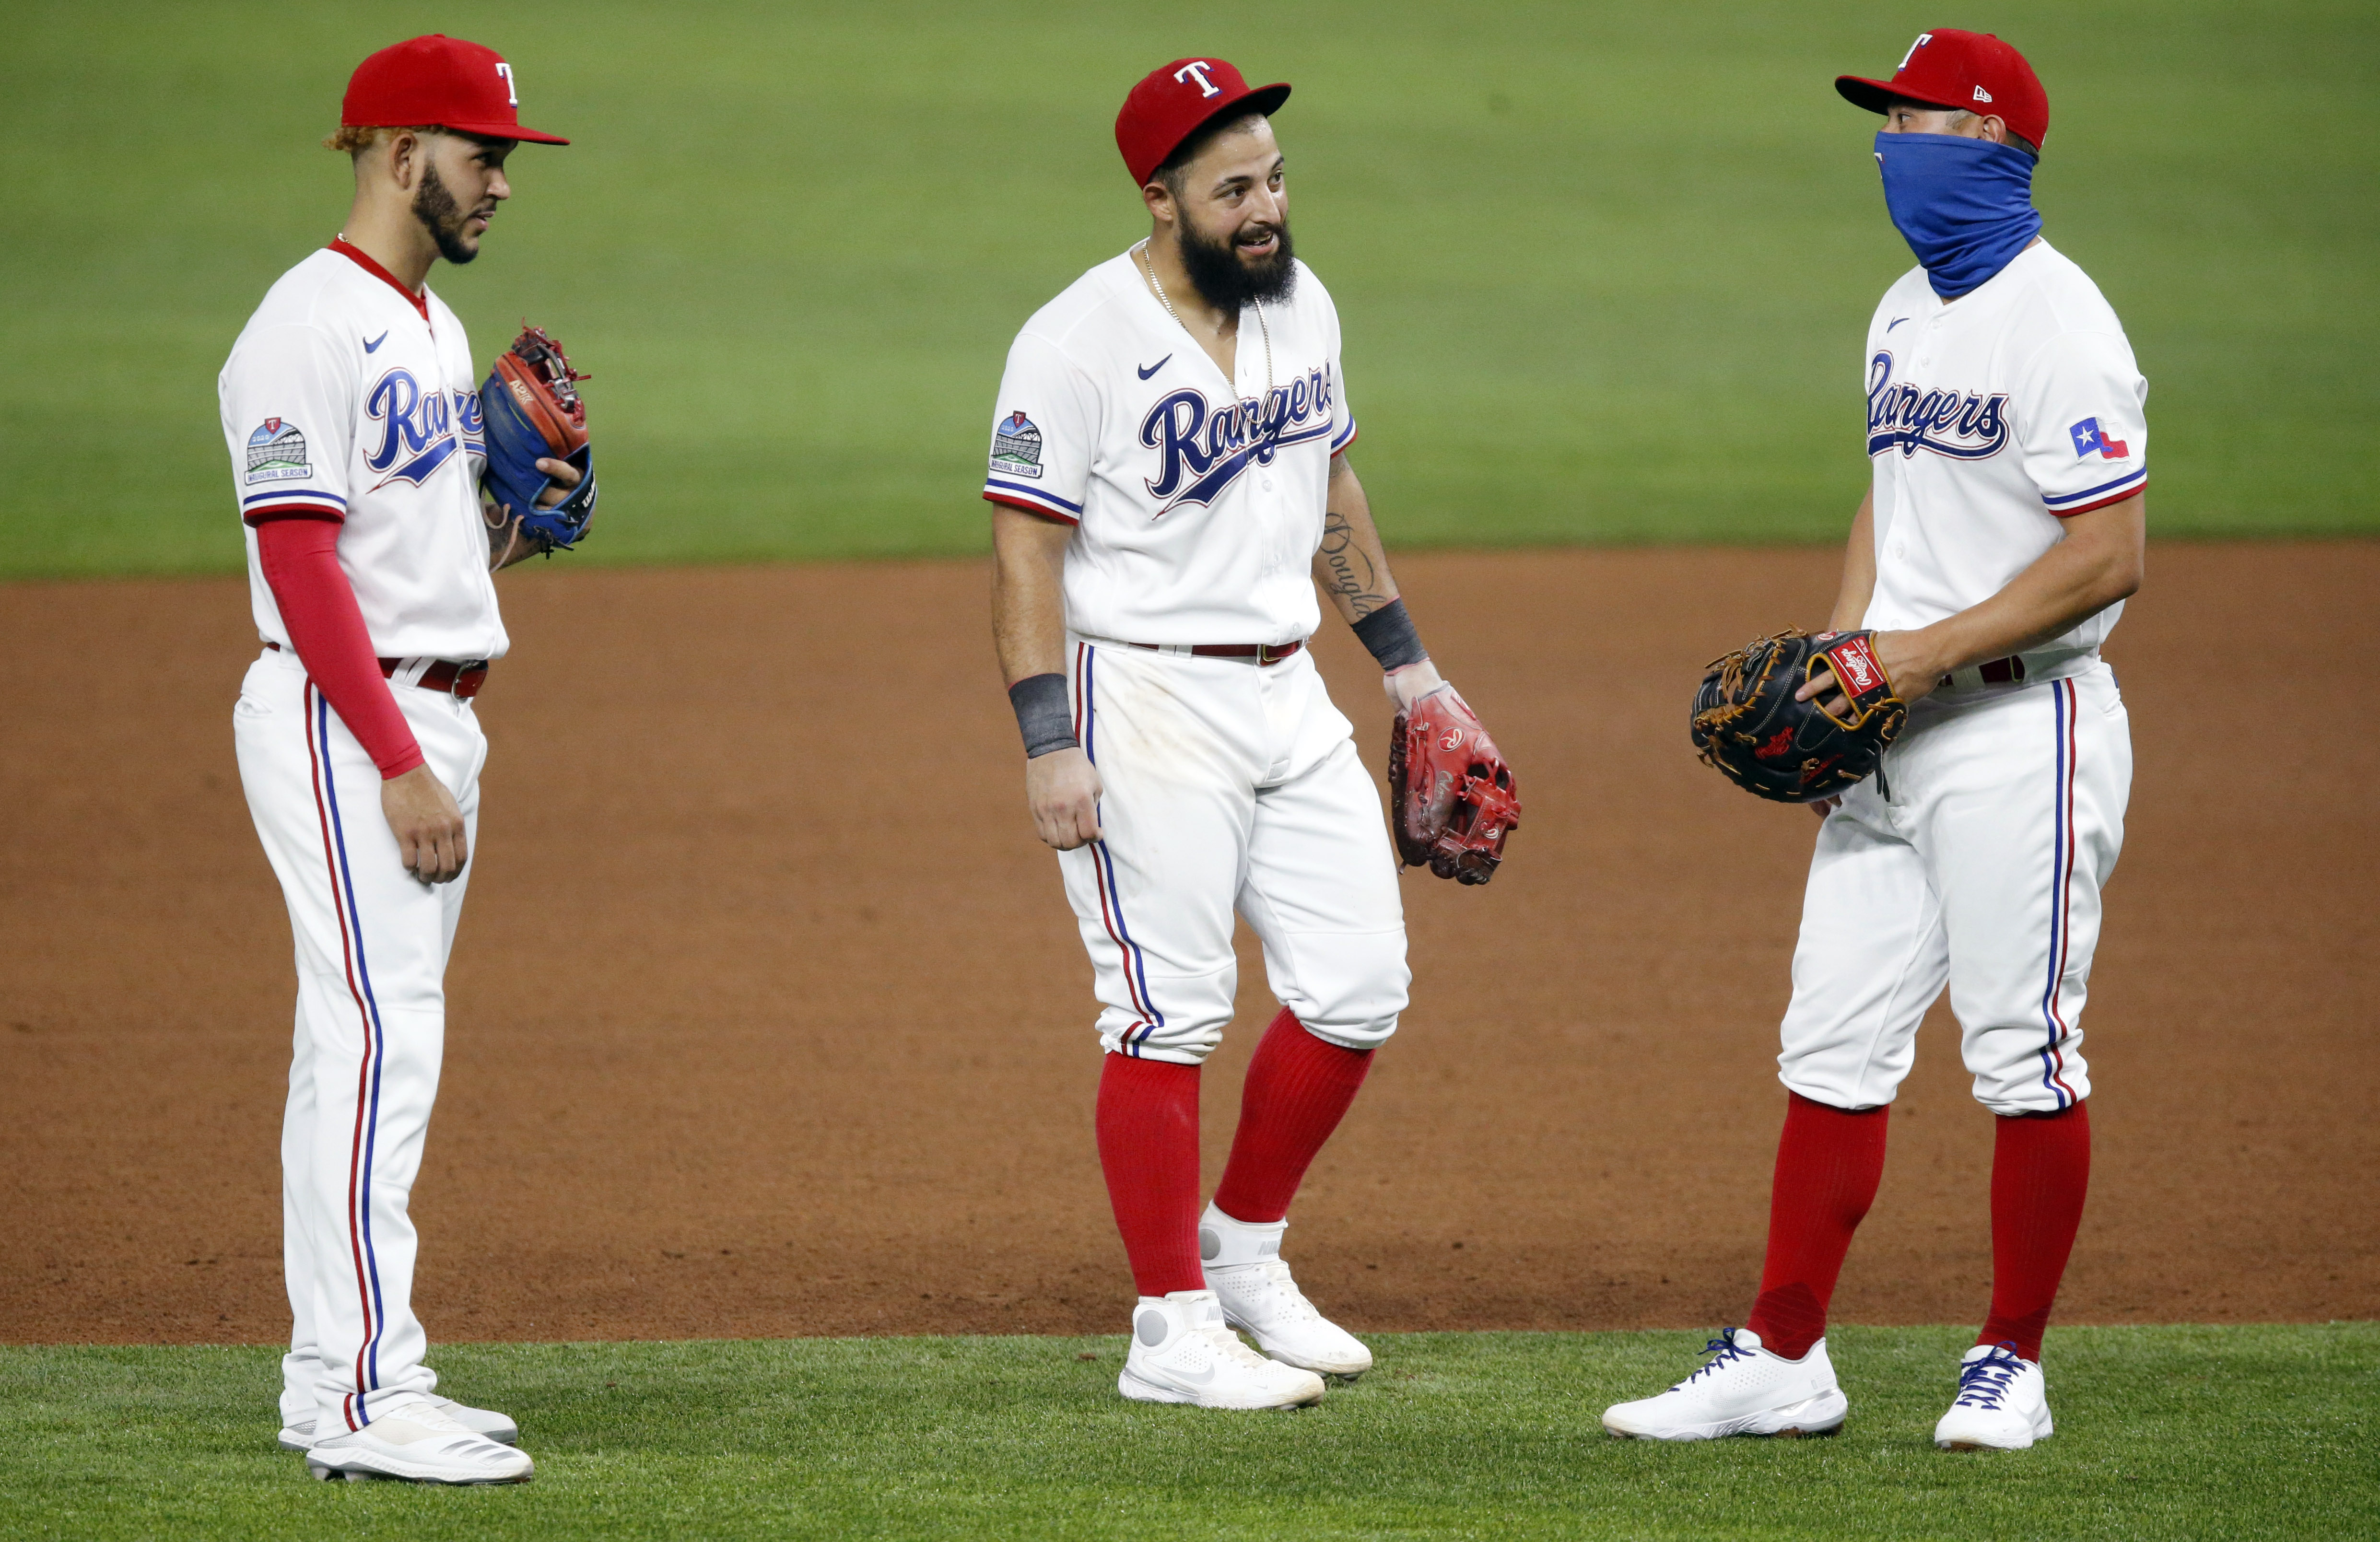 Is Rougned Odor already the MVP of the Rangers?